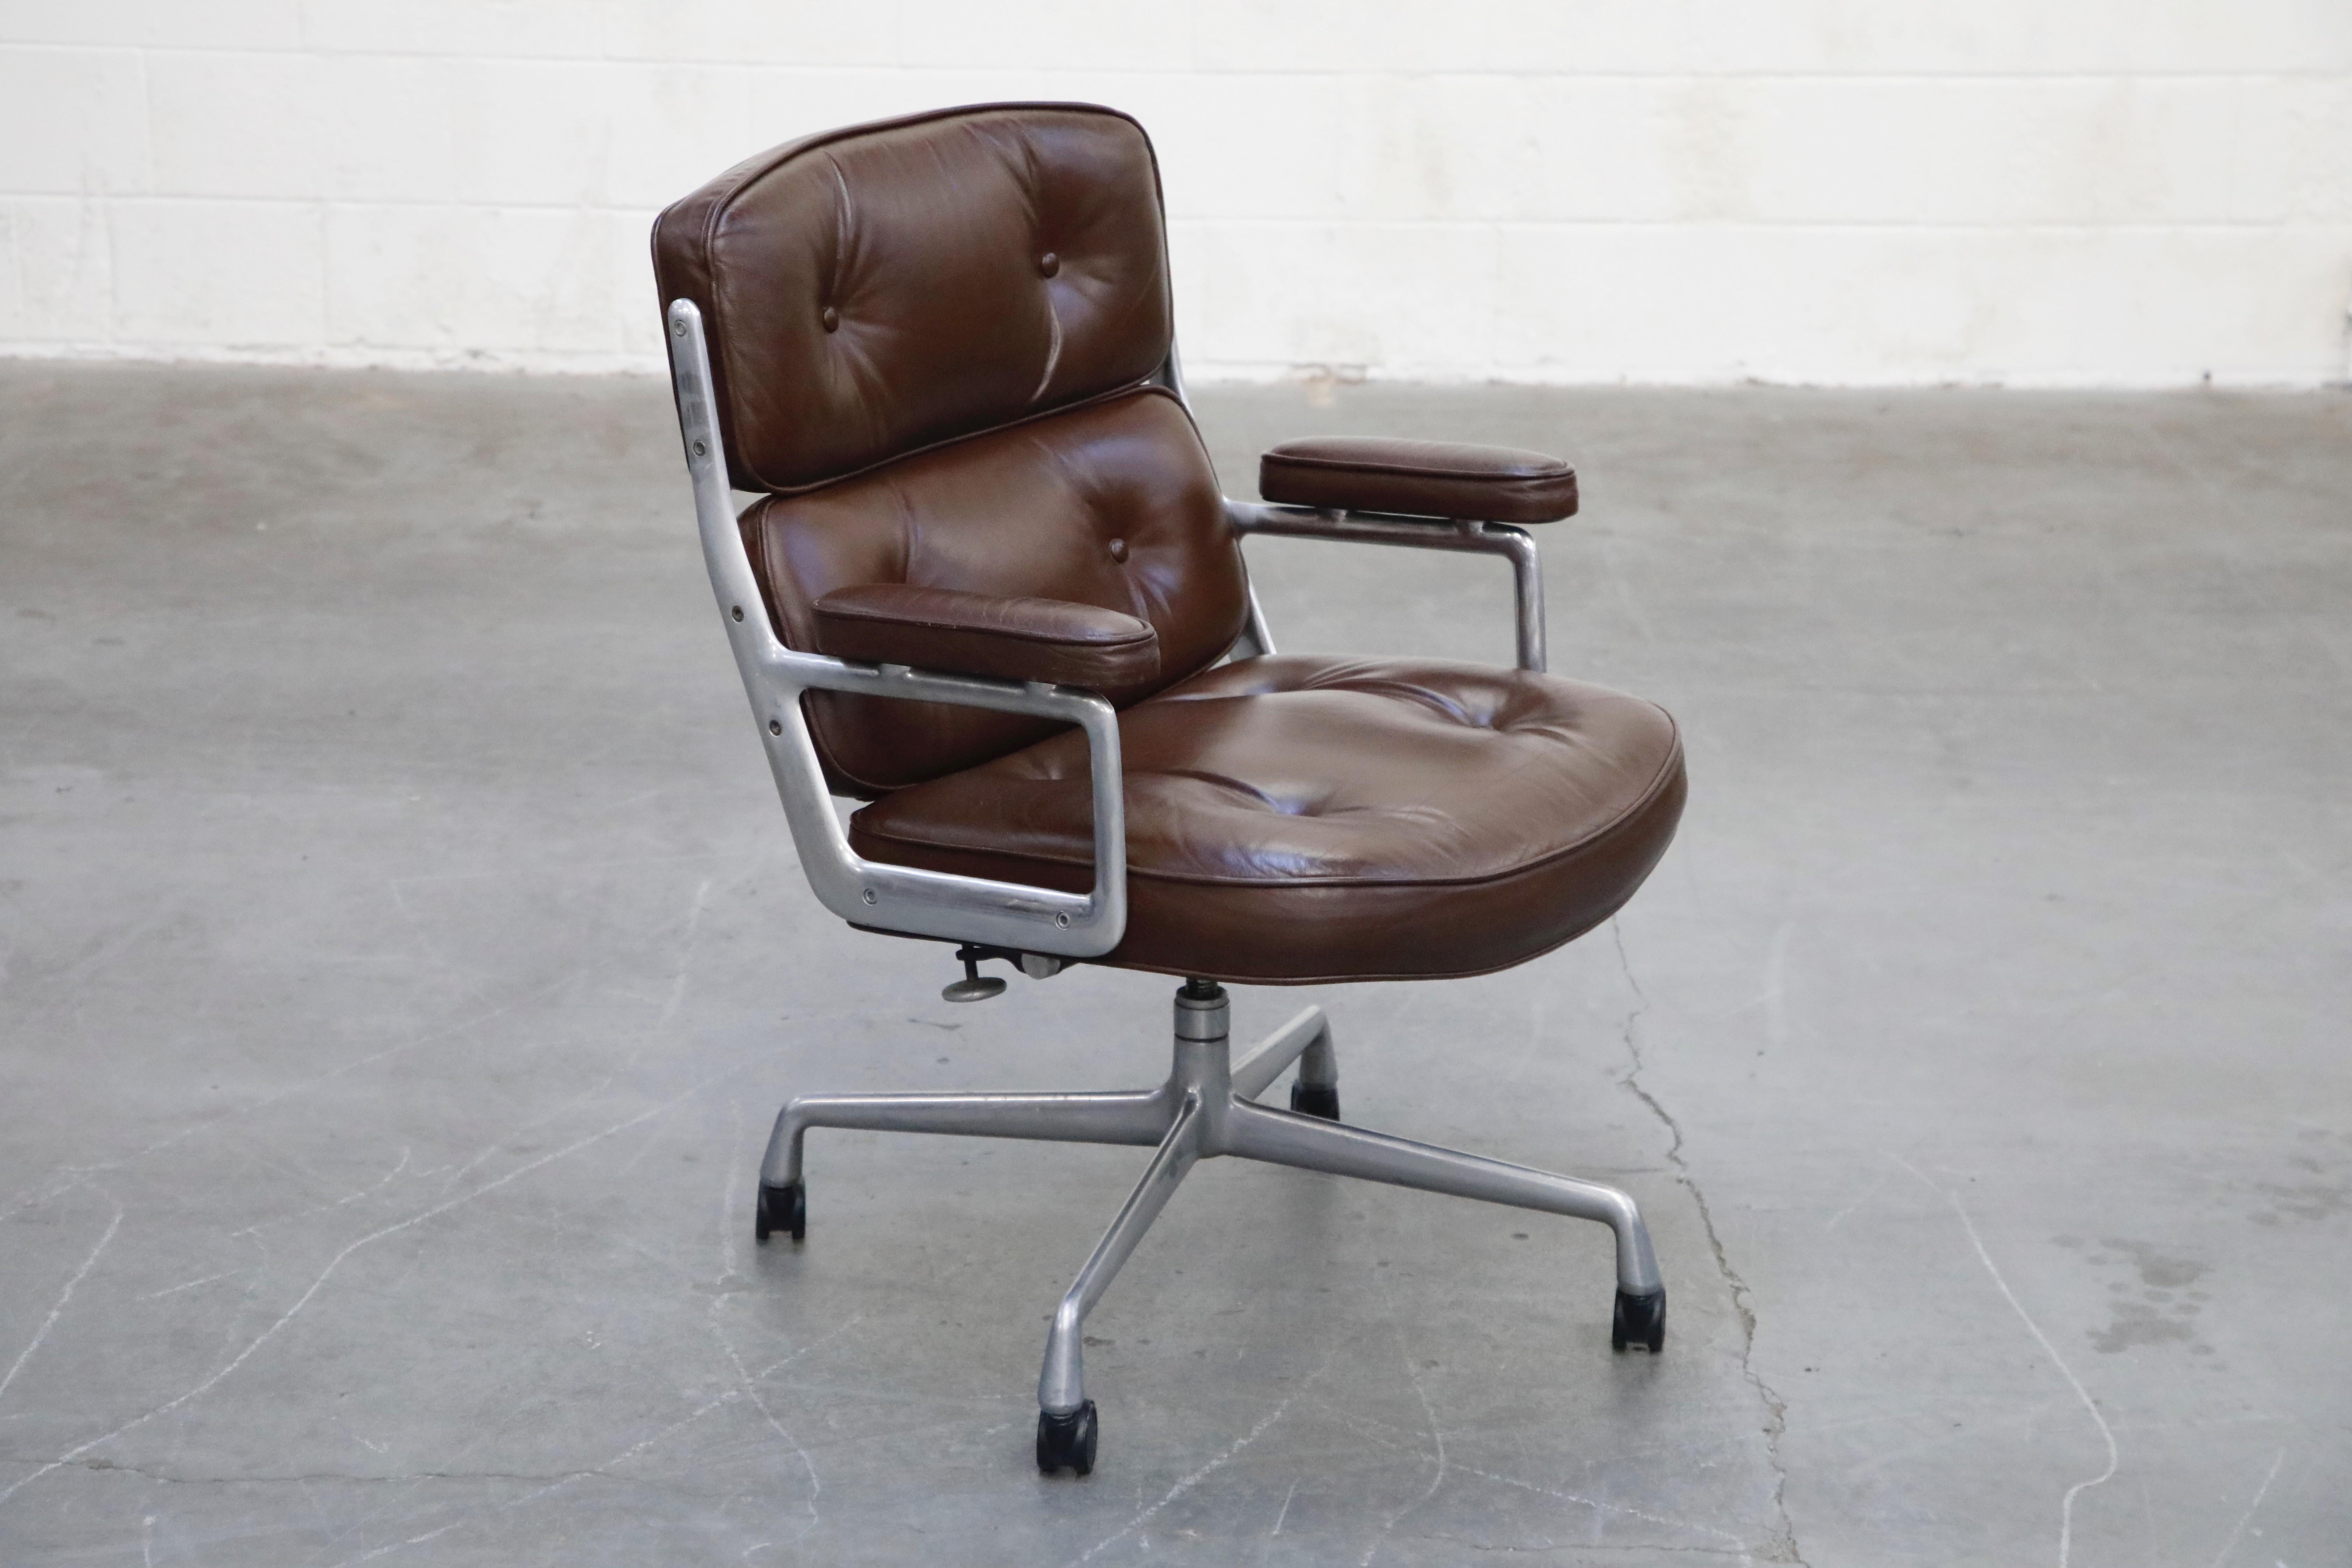 American Time Life Executive Desk Chairs by Charles Eames for Herman Miller, 1977, Signed